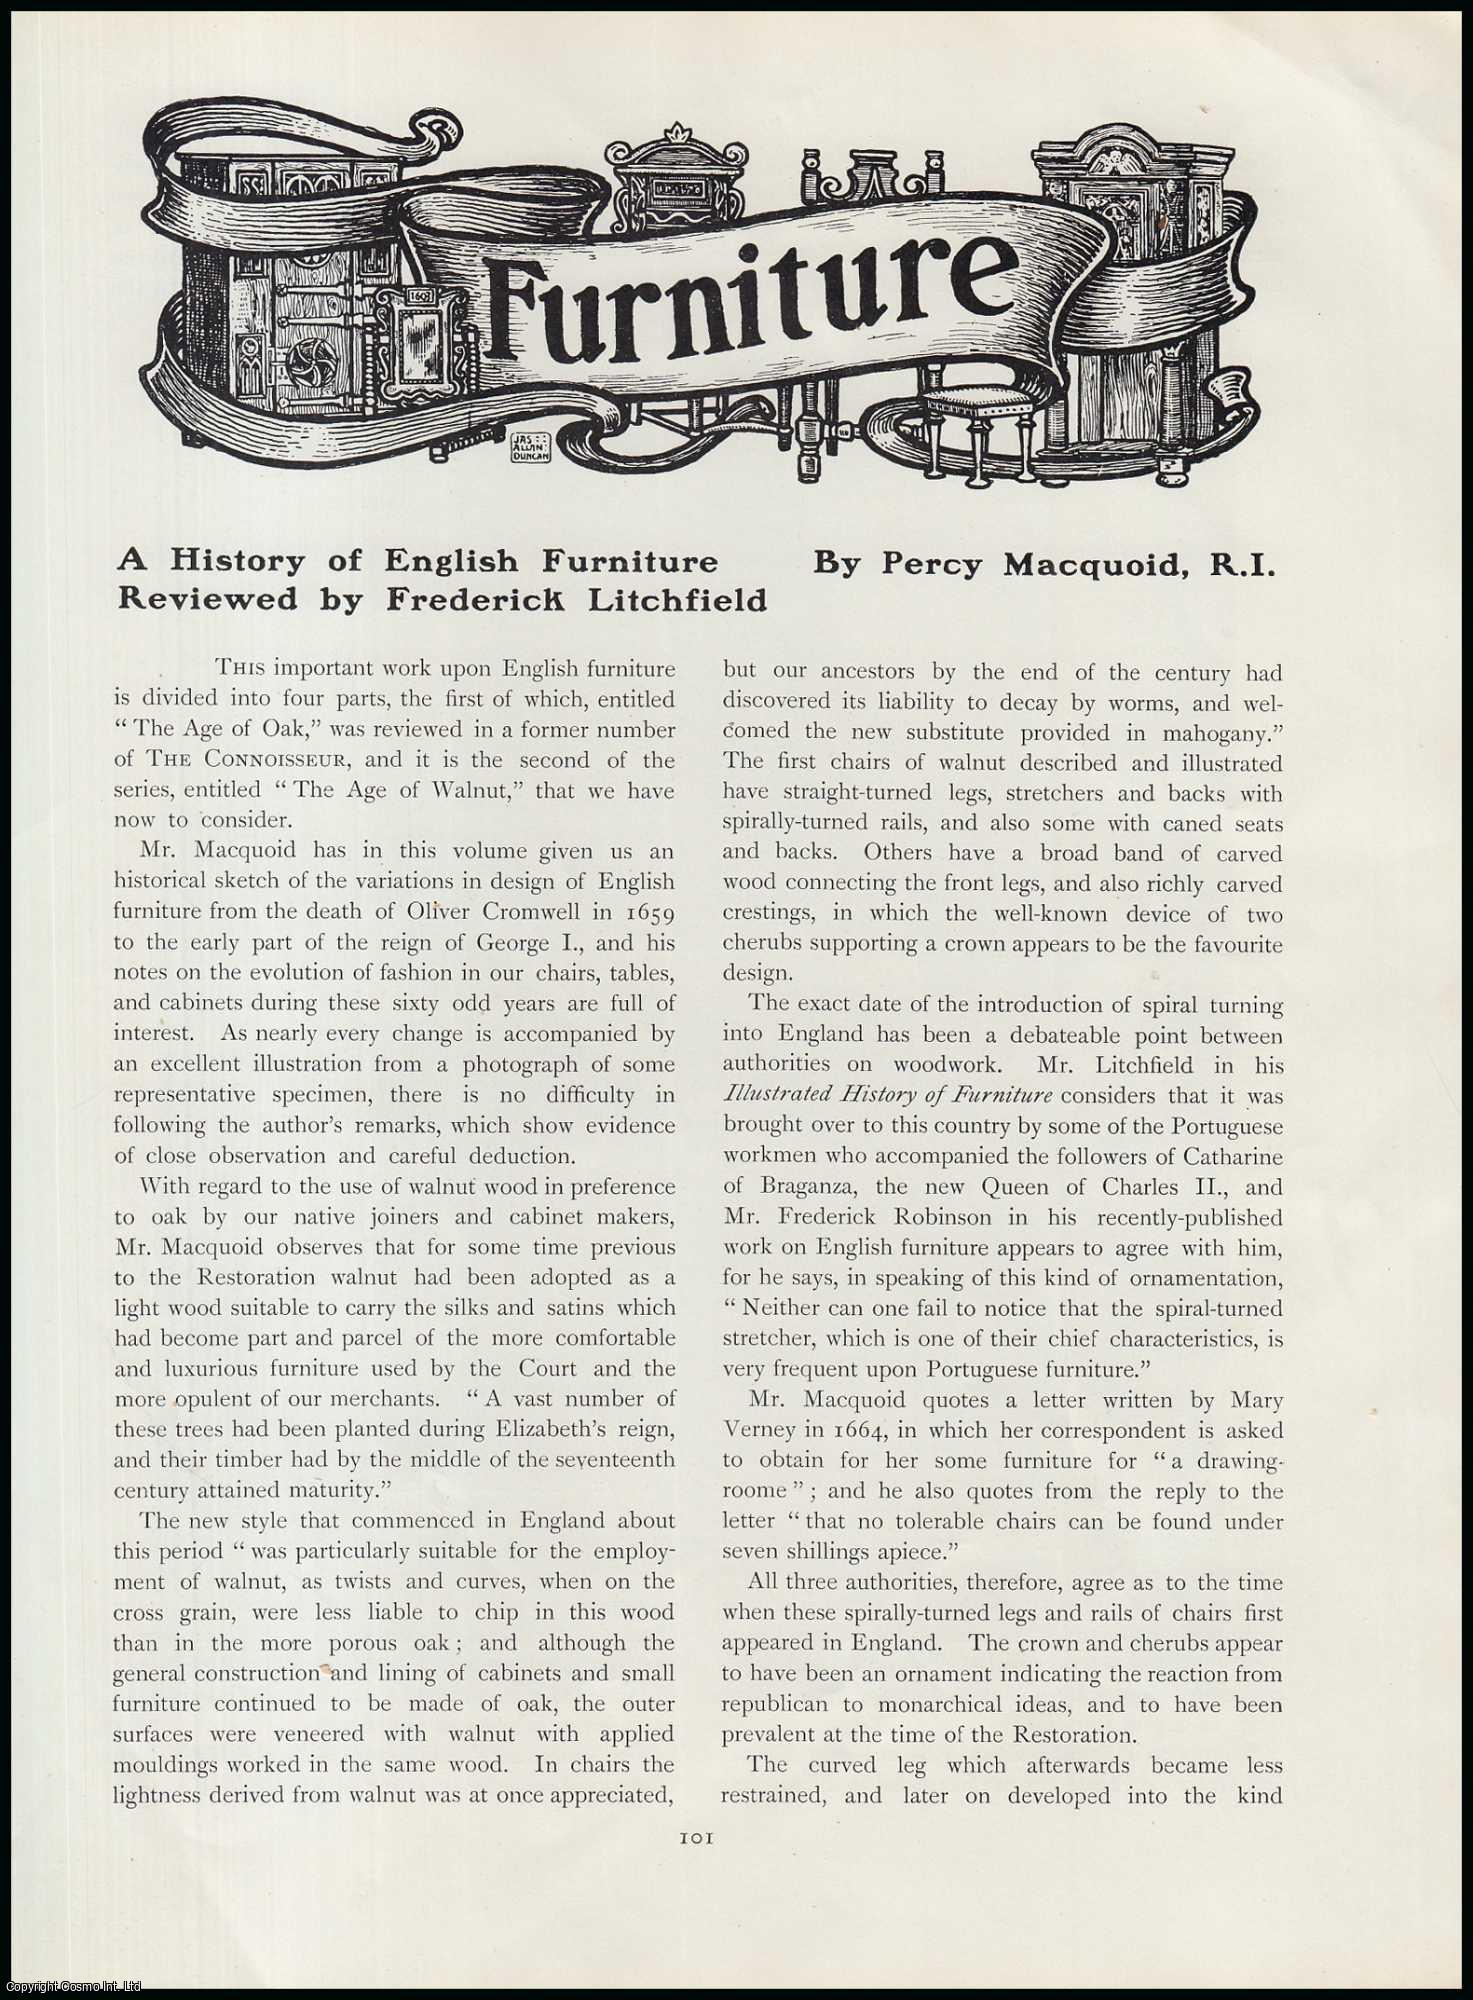 Percy Macquoid - A History of English Furniture : Reviewed by Frederick Litchfield. An original article from The Connoisseur, 1906.